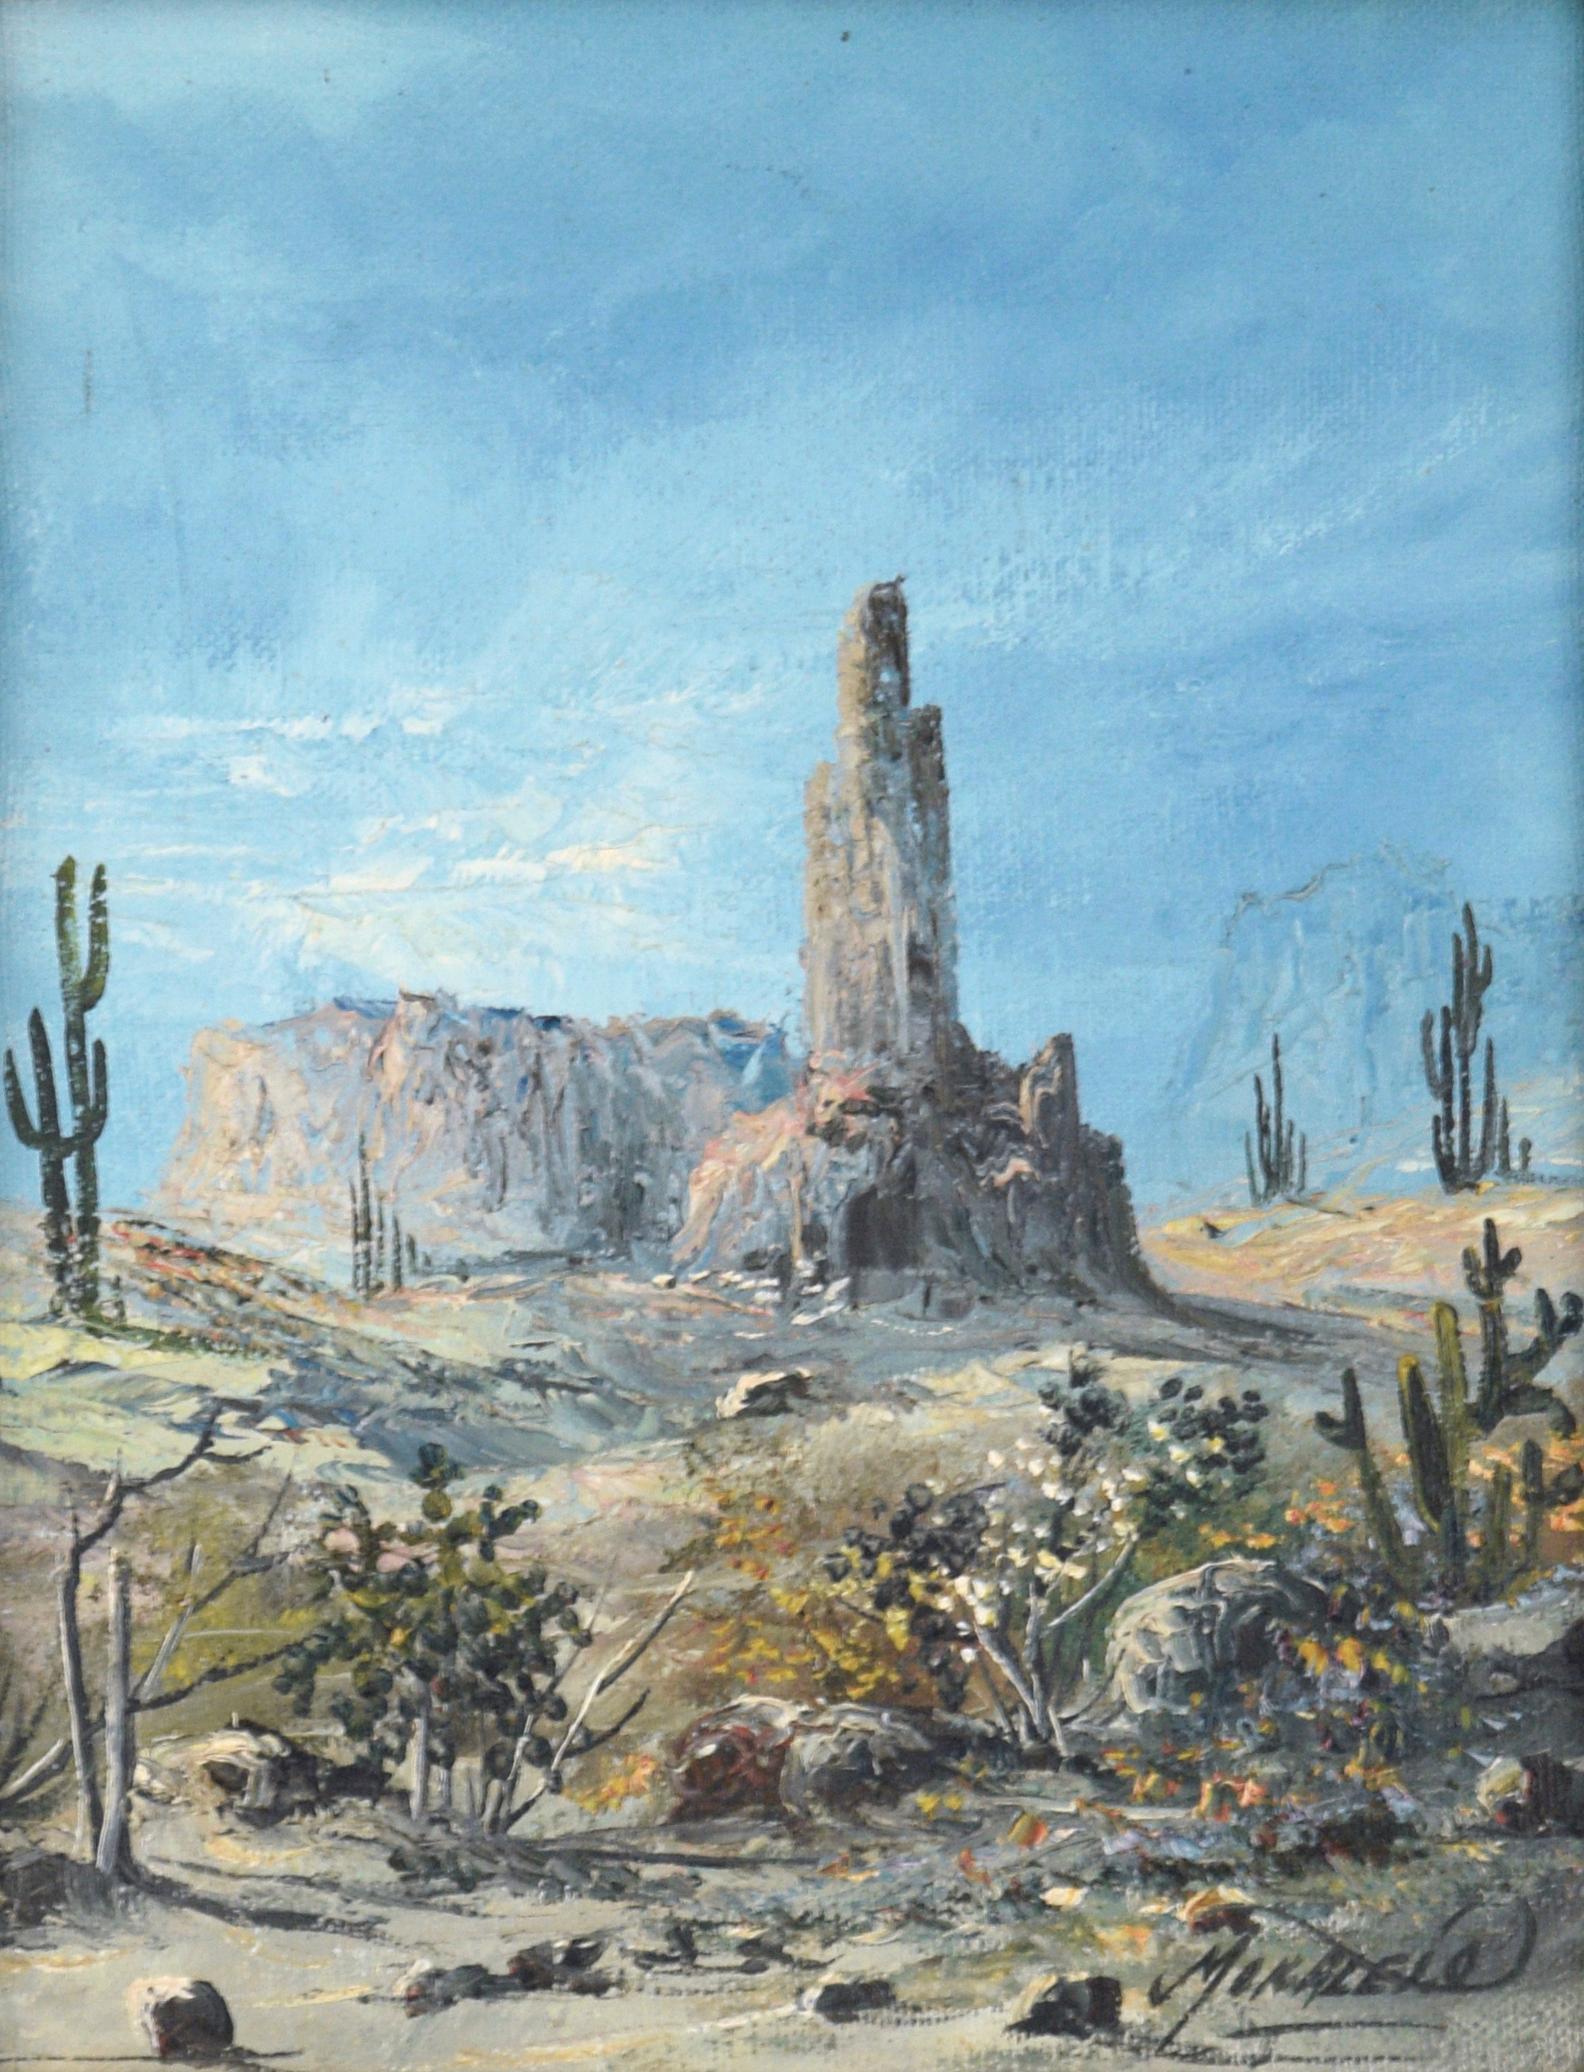 Desert Monuments - Textured Landscape - Painting by Moralelo